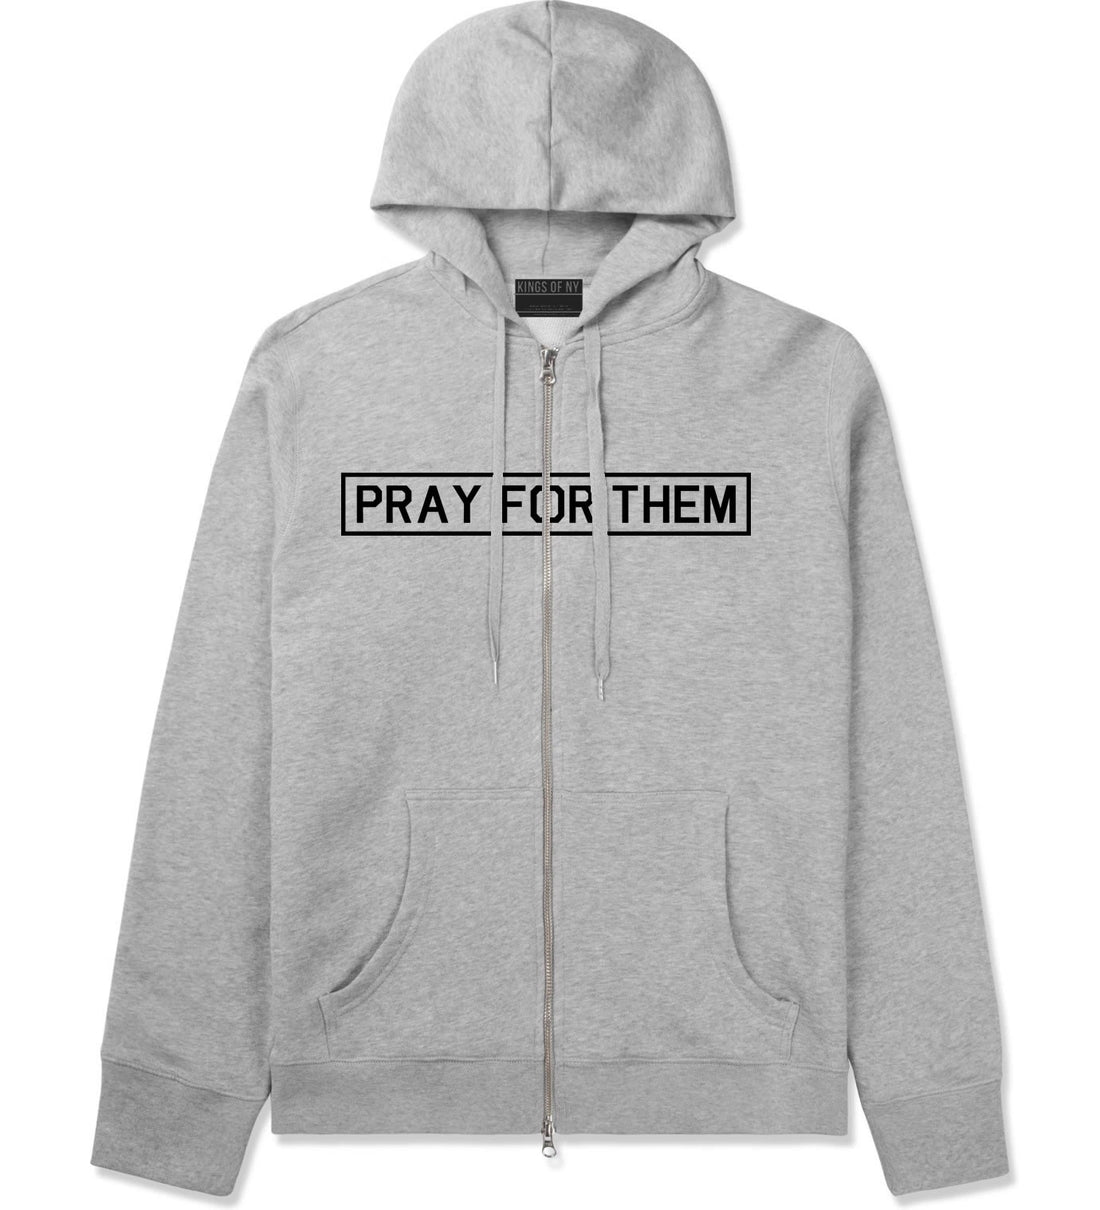 Pray For Them Fall15 Zip Up Hoodie Hoody in Grey by Kings Of NY